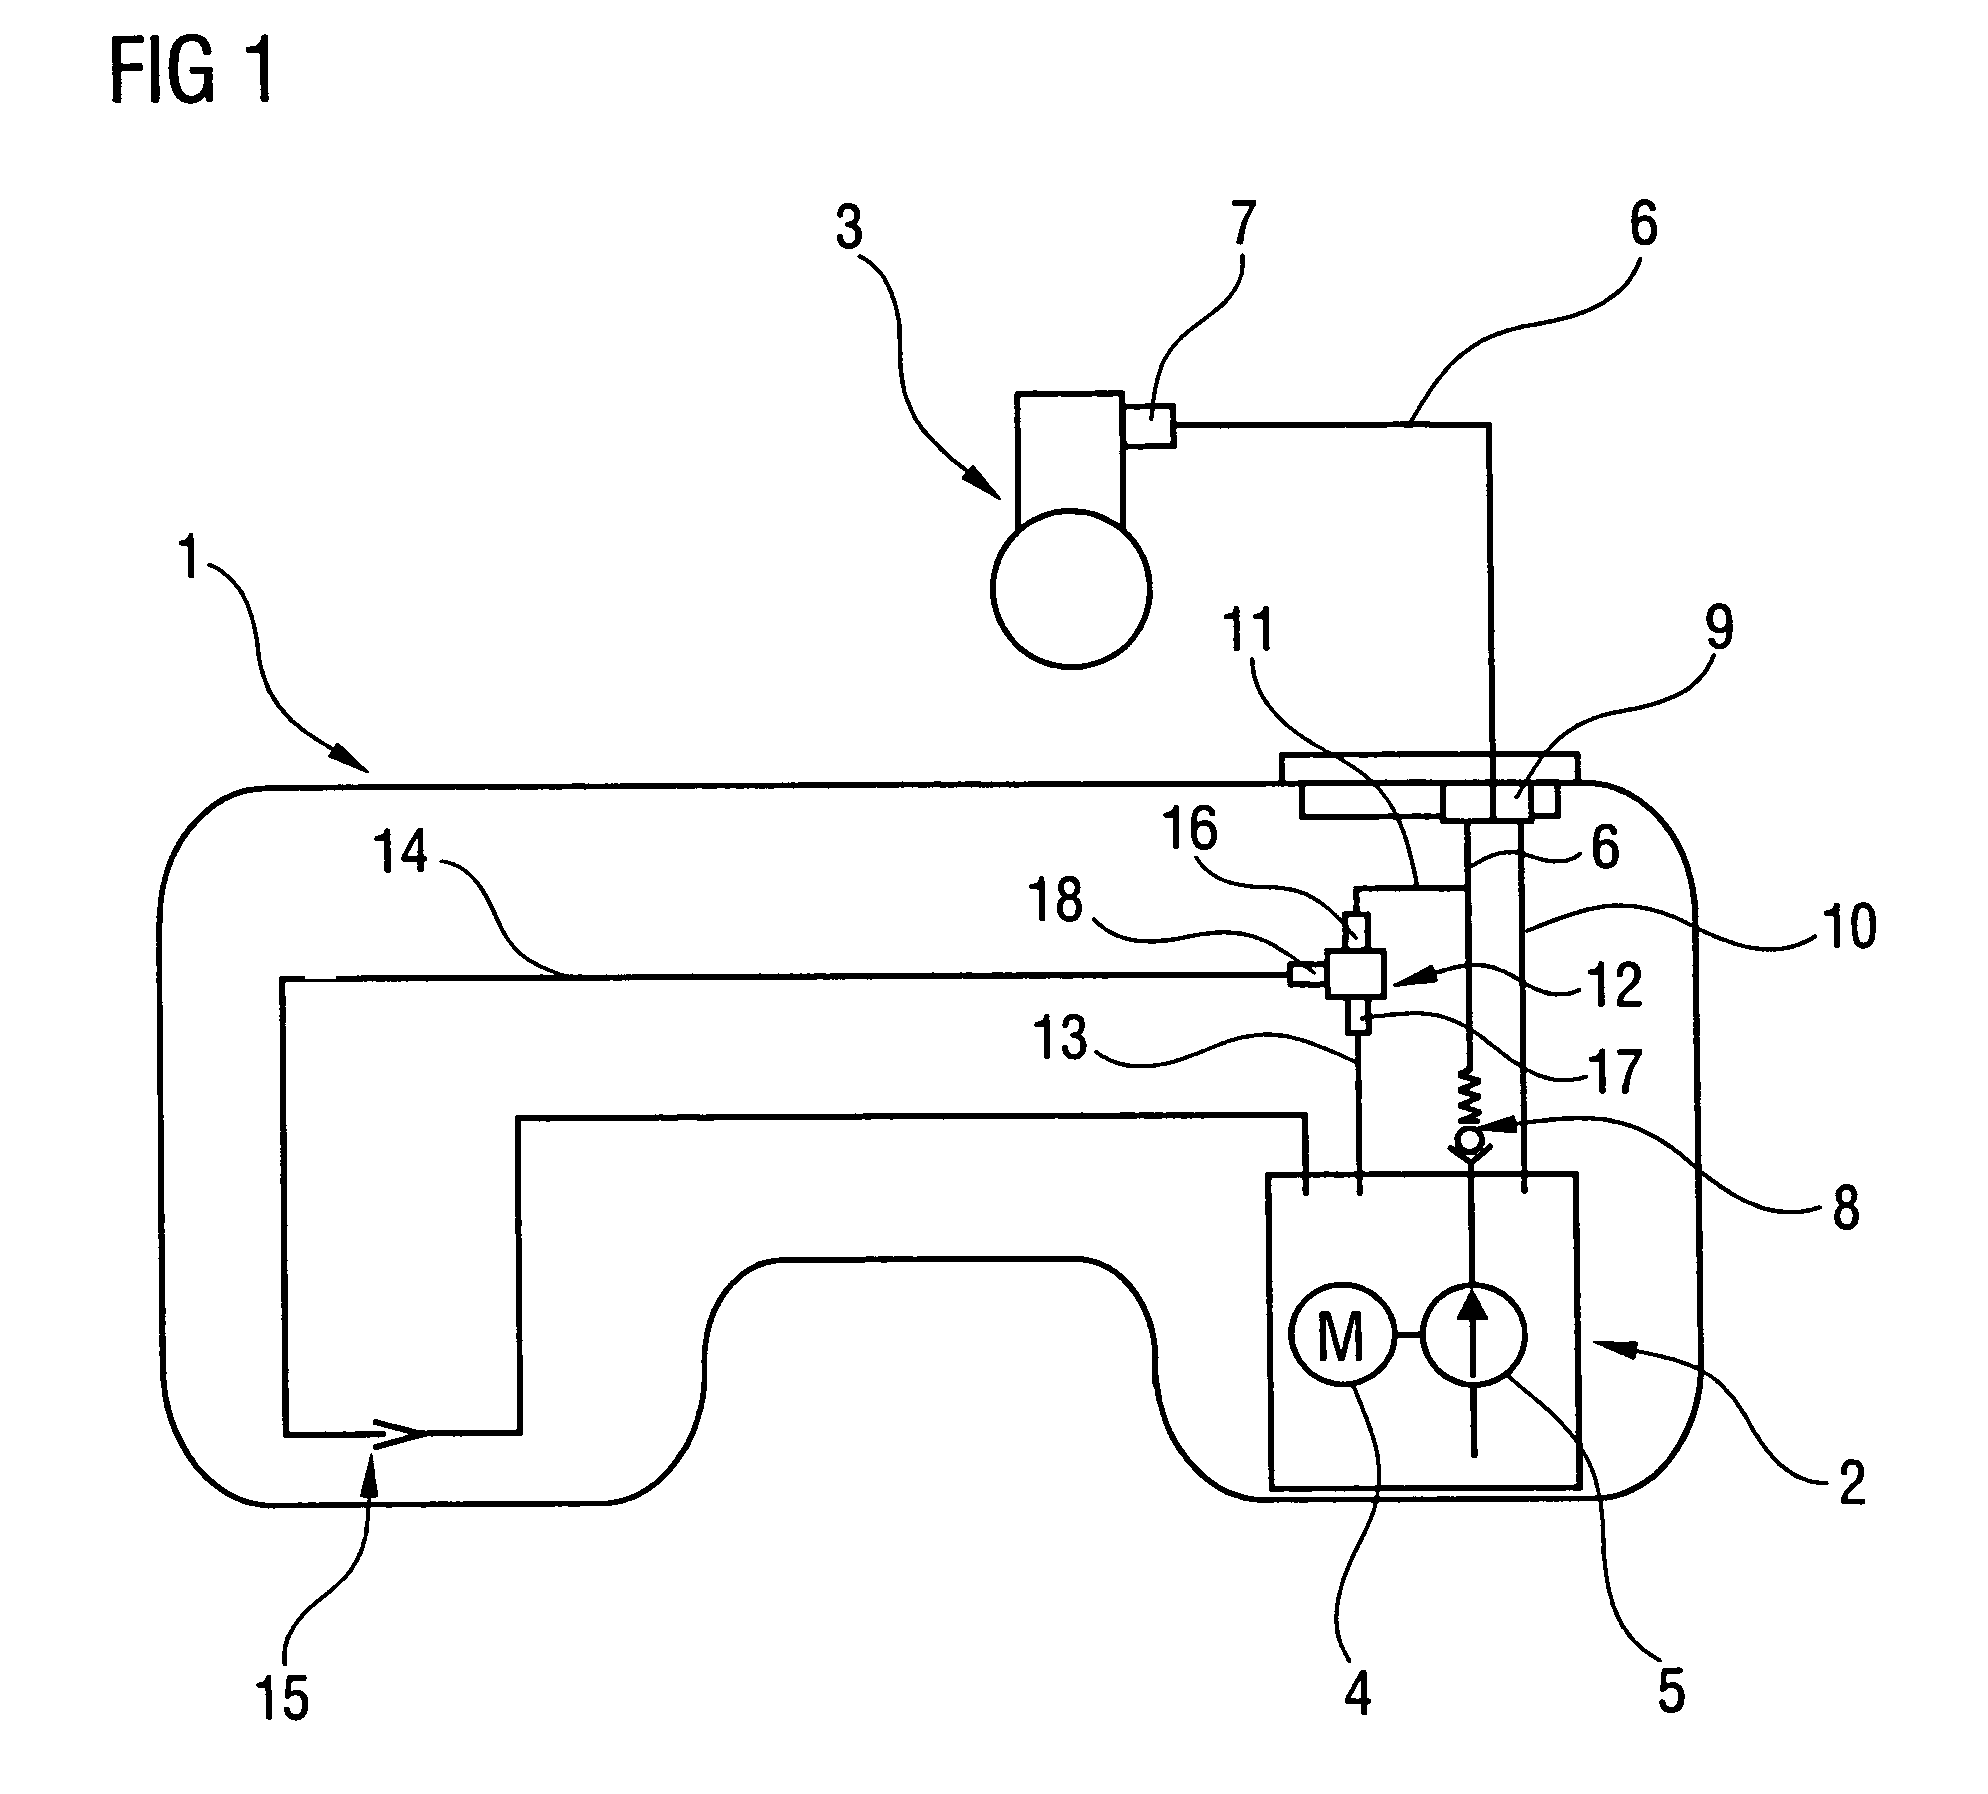 Apparatus for controlling a pressure in a fuel inflow line